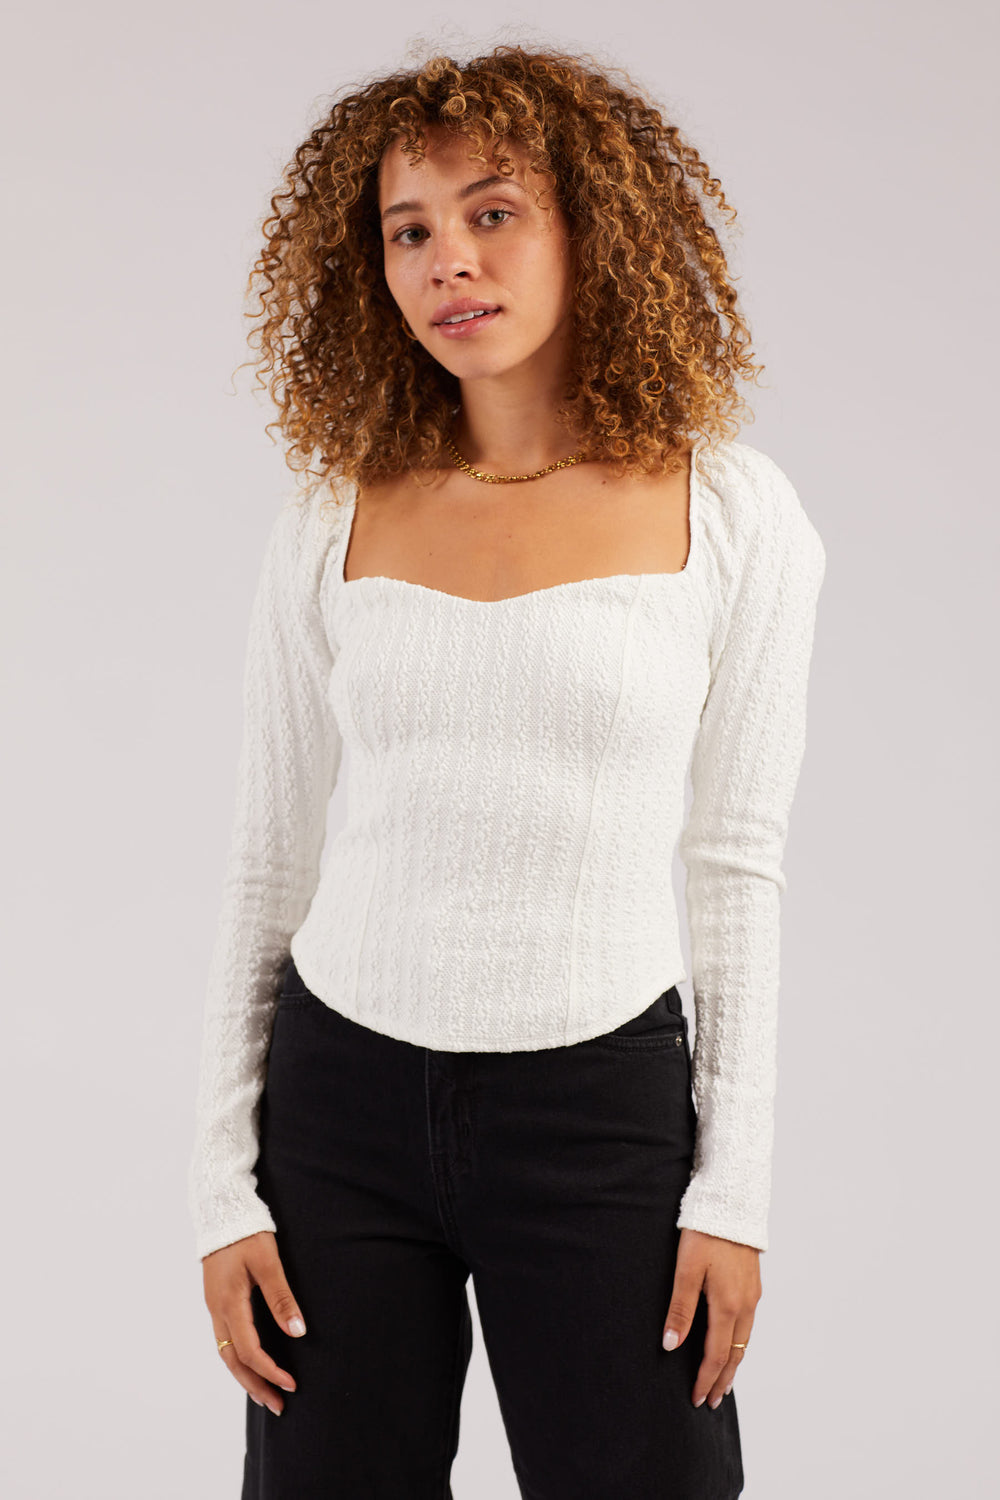 Winter White Brittany Top